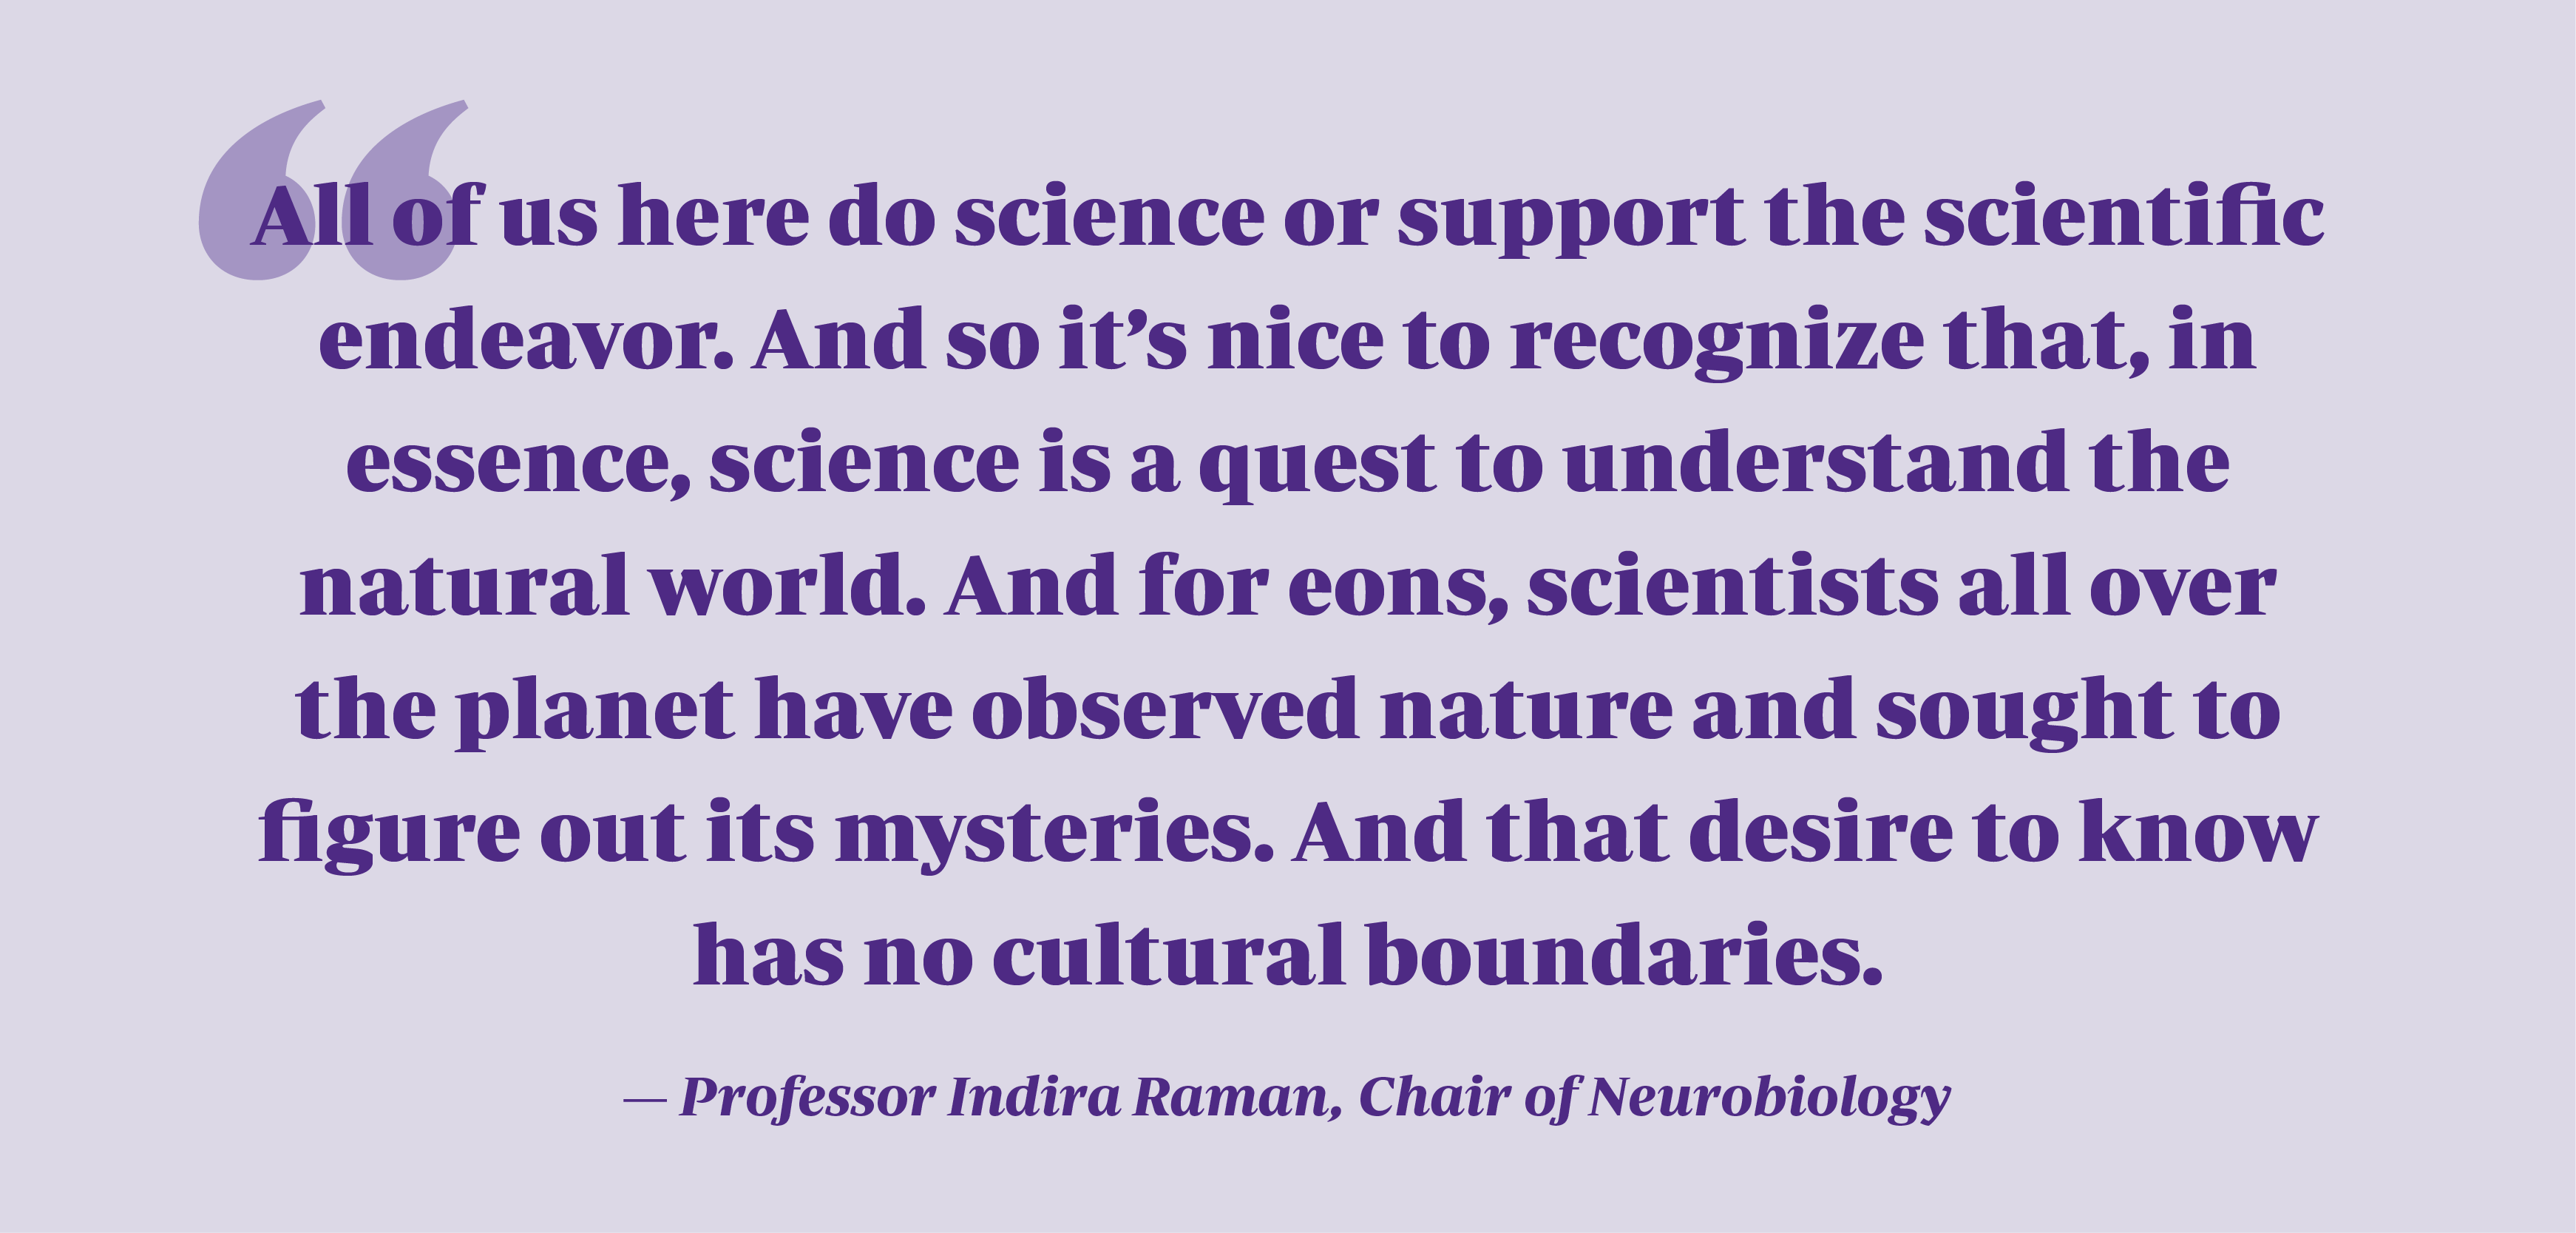 Purple quote on light purple background reads "All of us here do science or support the scientific endeavor. And so it’s nice to recognize that, in essence, science is a quest to understand the natural world. And for eons, scientists all over the planet have observed nature and sought to figure out its mysteries. And that desire to know has no cultural boundaries." 